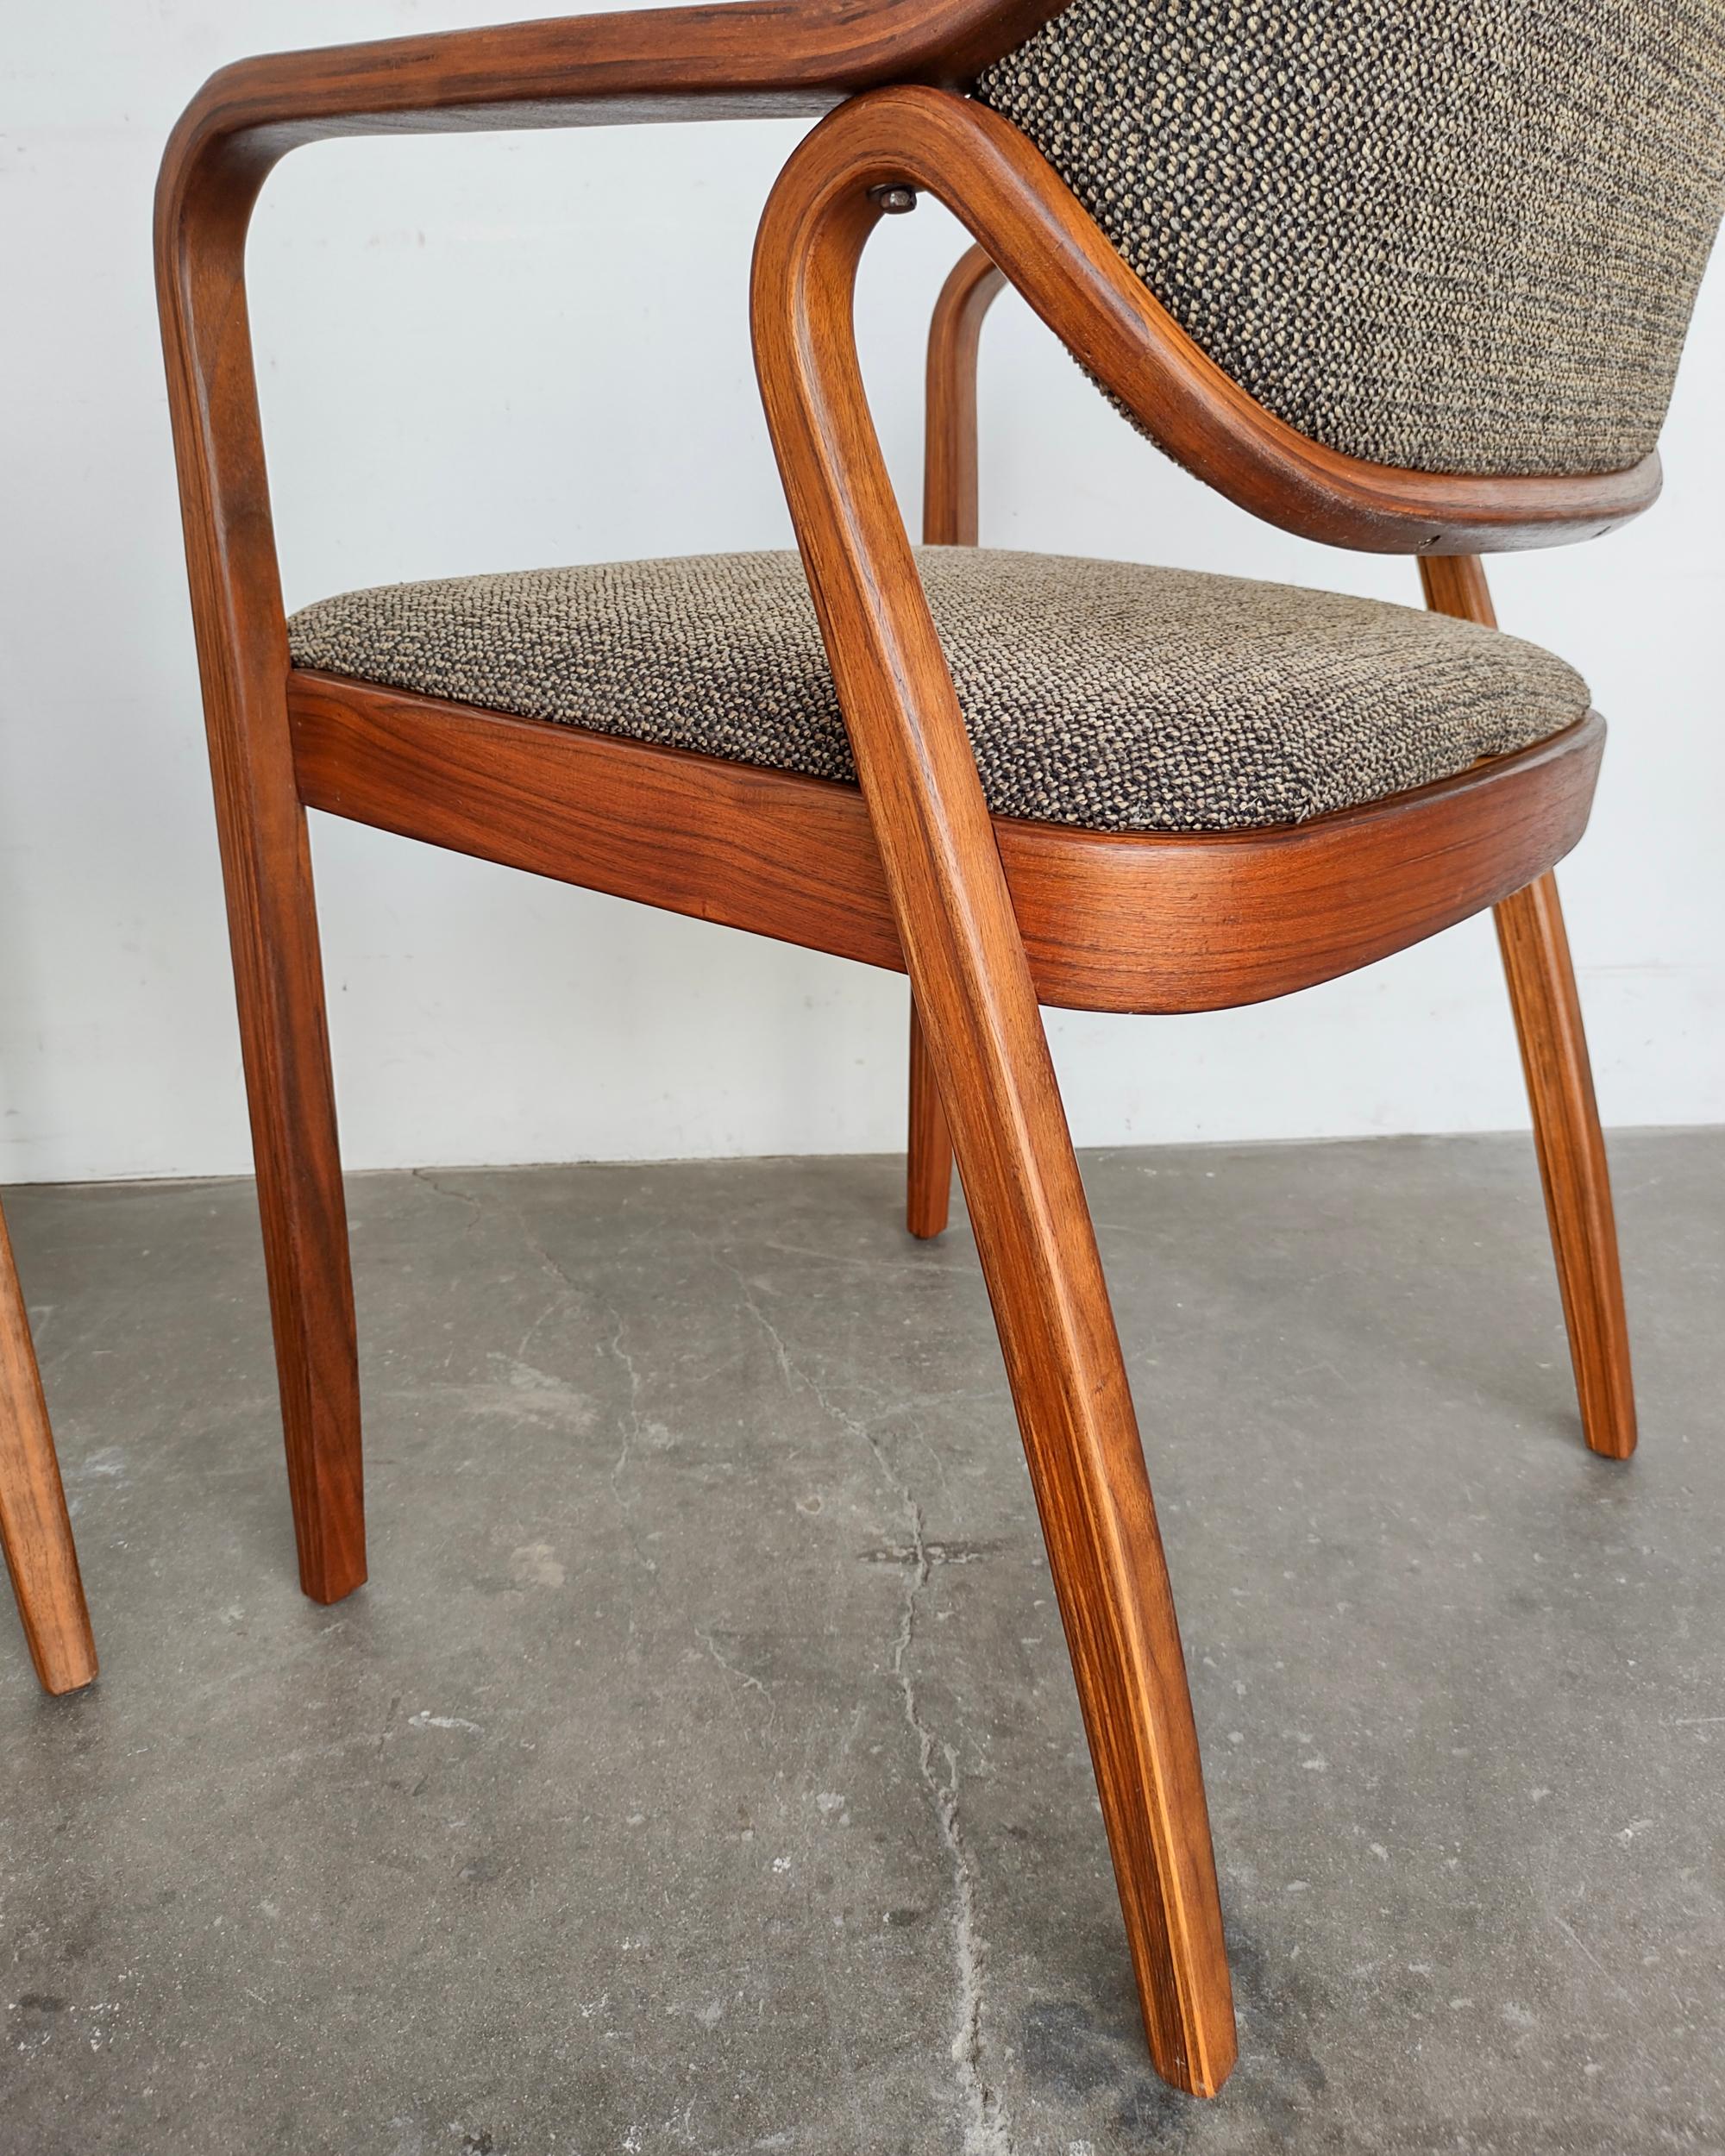 20th Century Pair (2) of Bentwood Walnut 1105 Arm Chairs by Don Pettit for Knoll